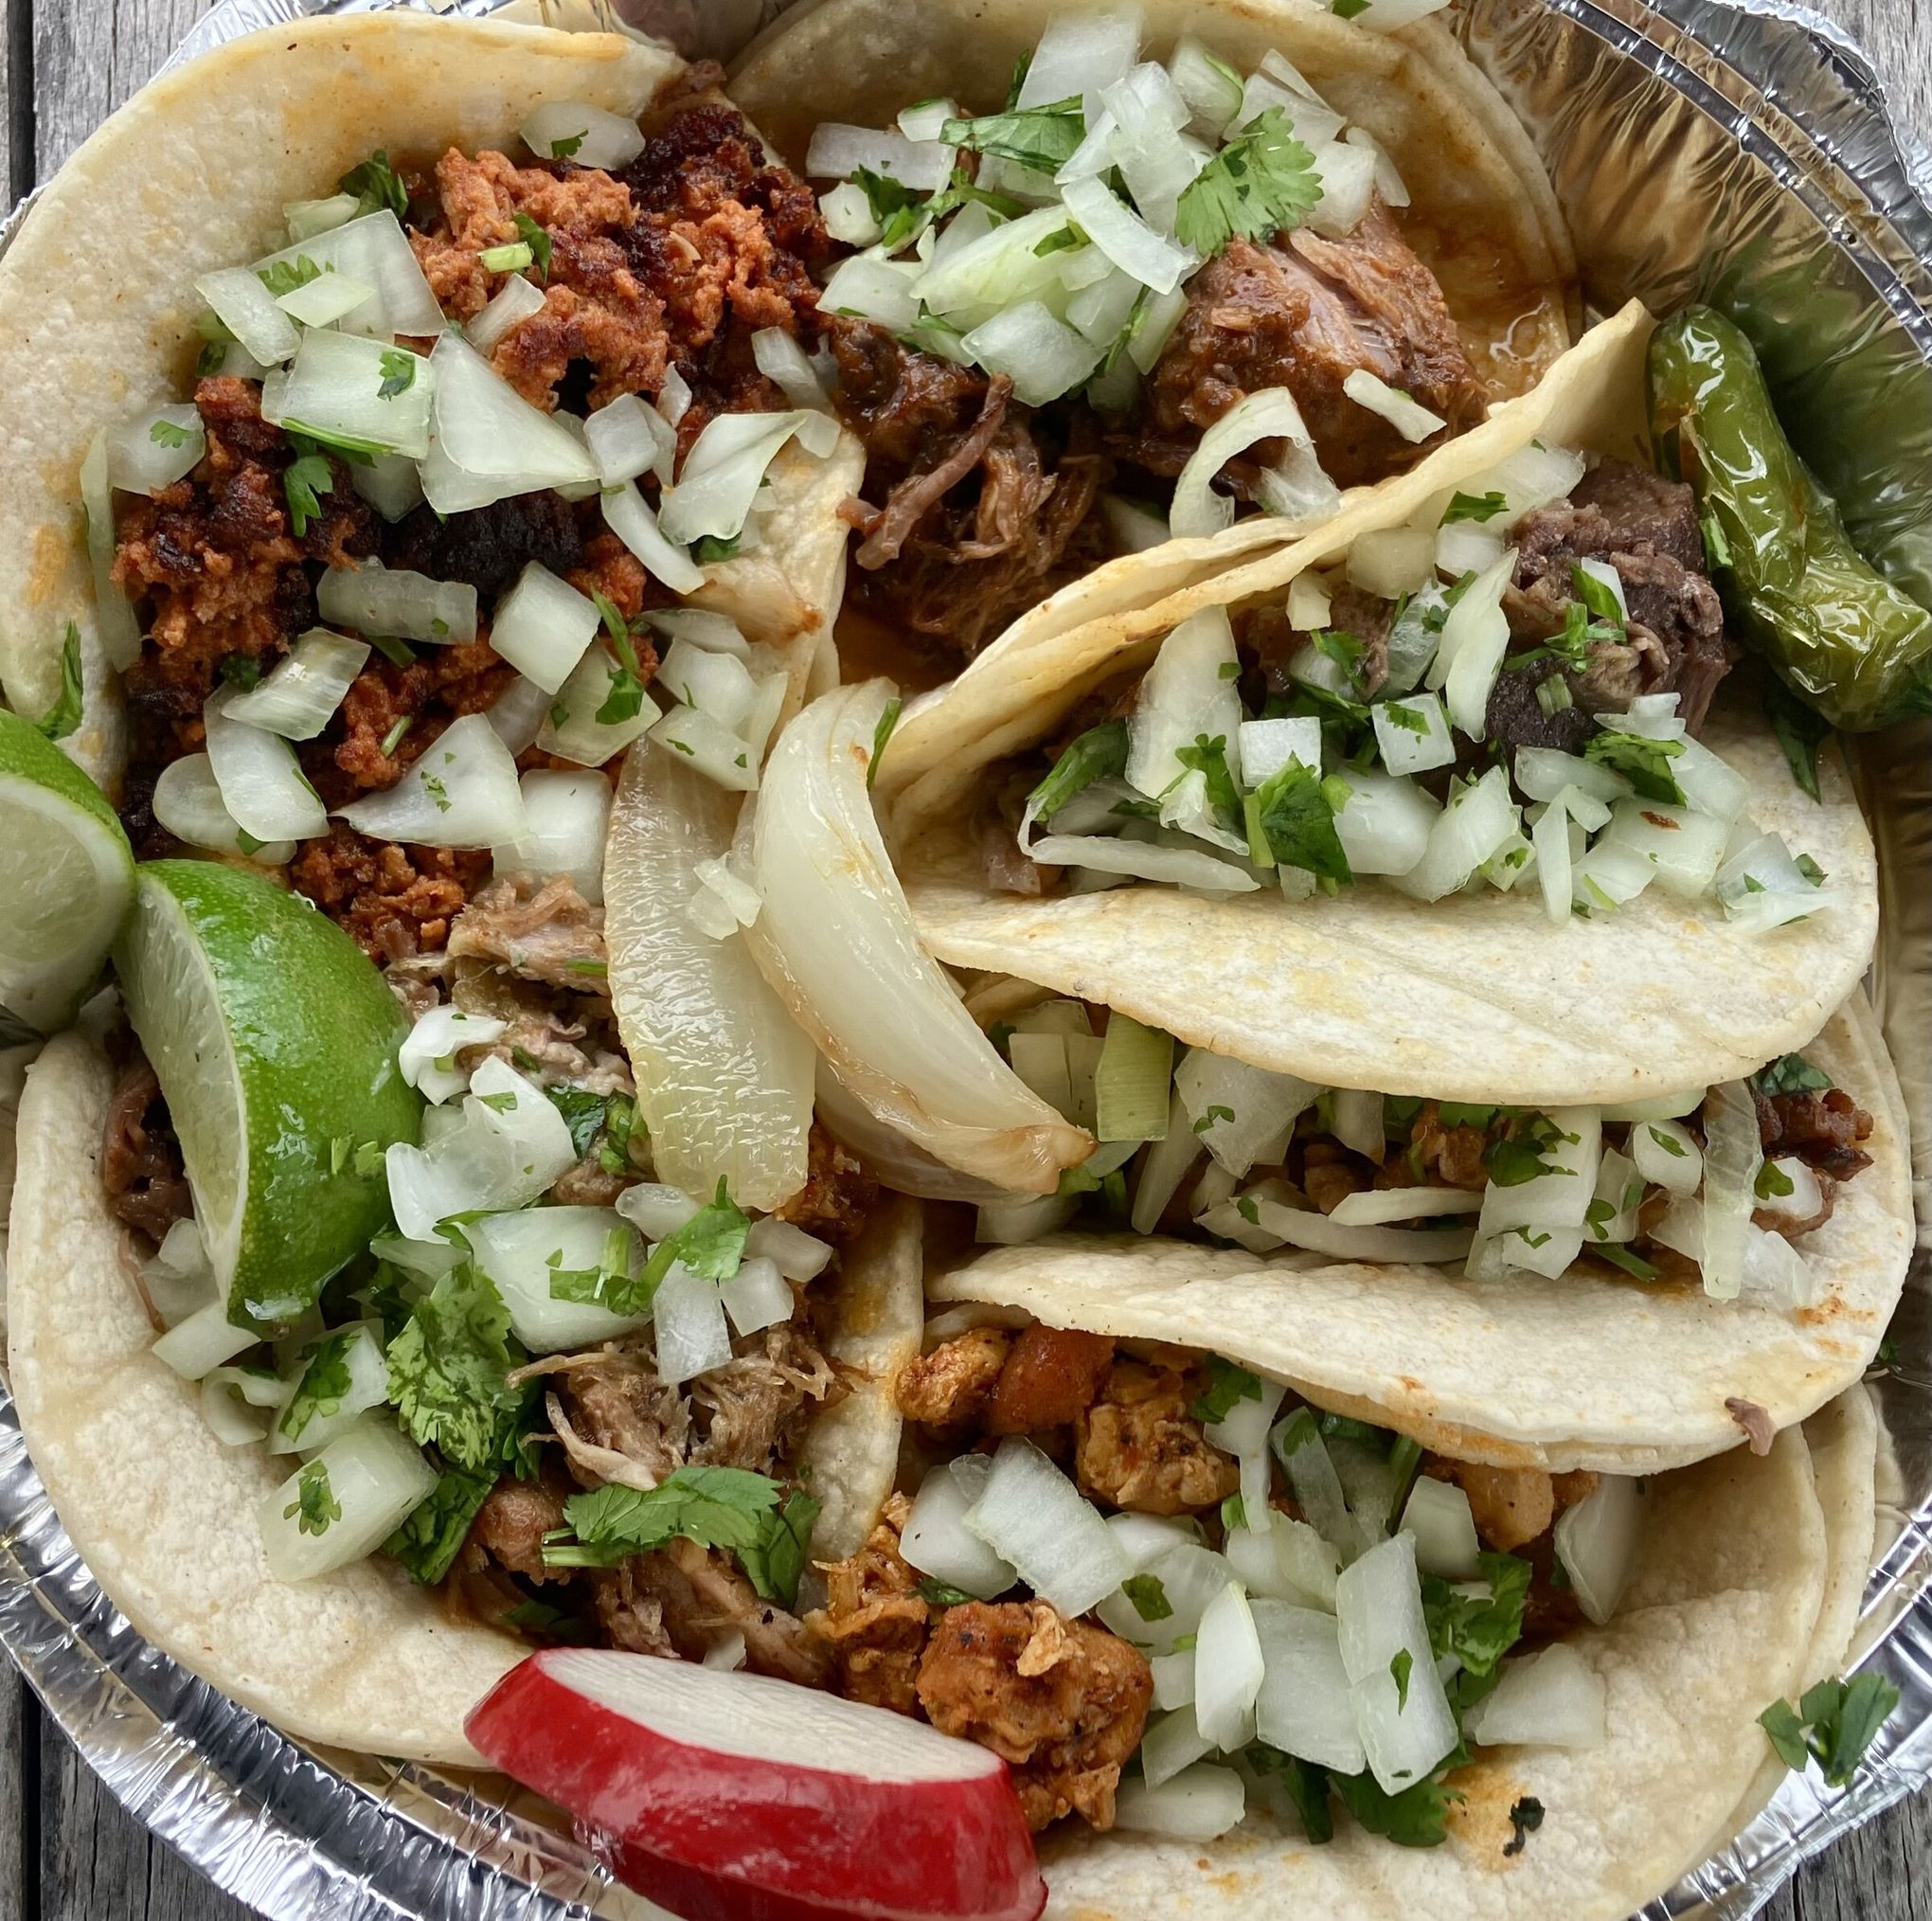 5 great Taco Tuesday deals for under $5 in the Greater Seattle area